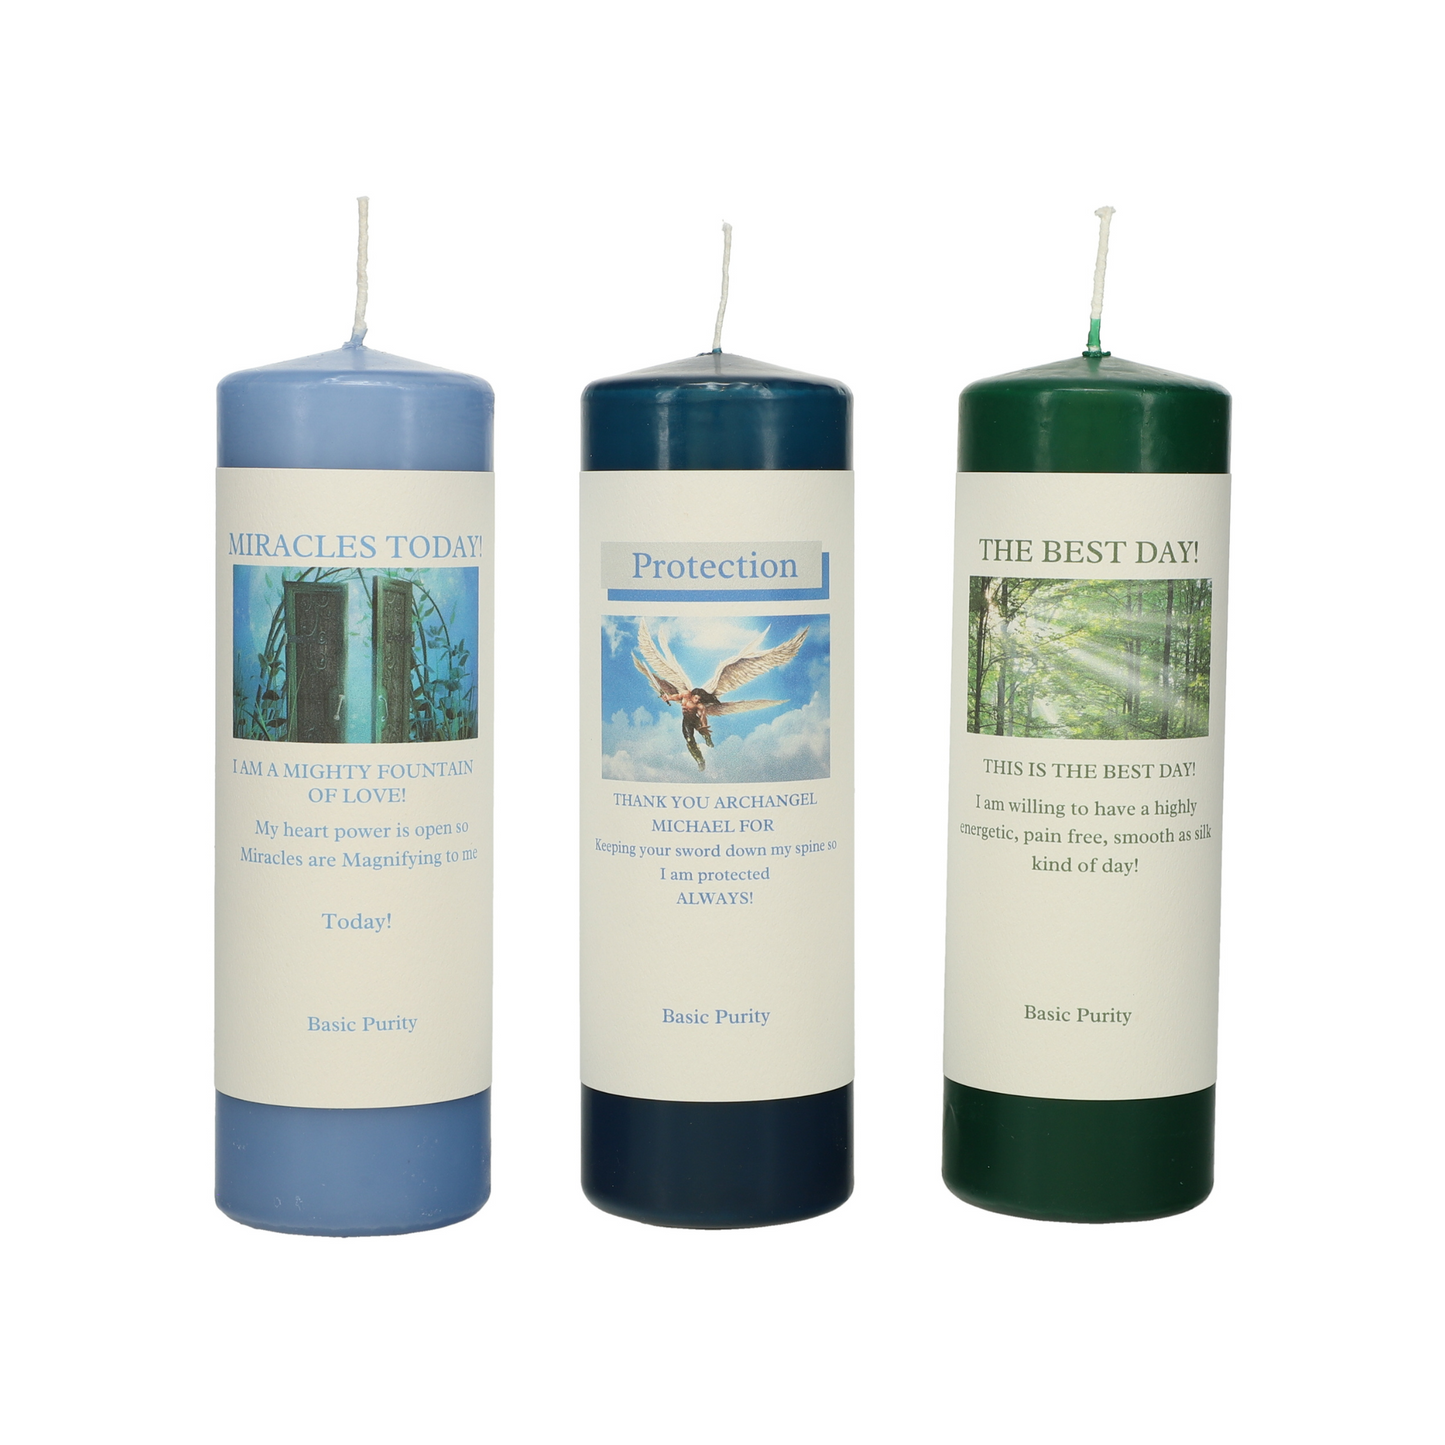 Miracle candle Archangel Micheal candle Joy candle  set by Mary Armendarez